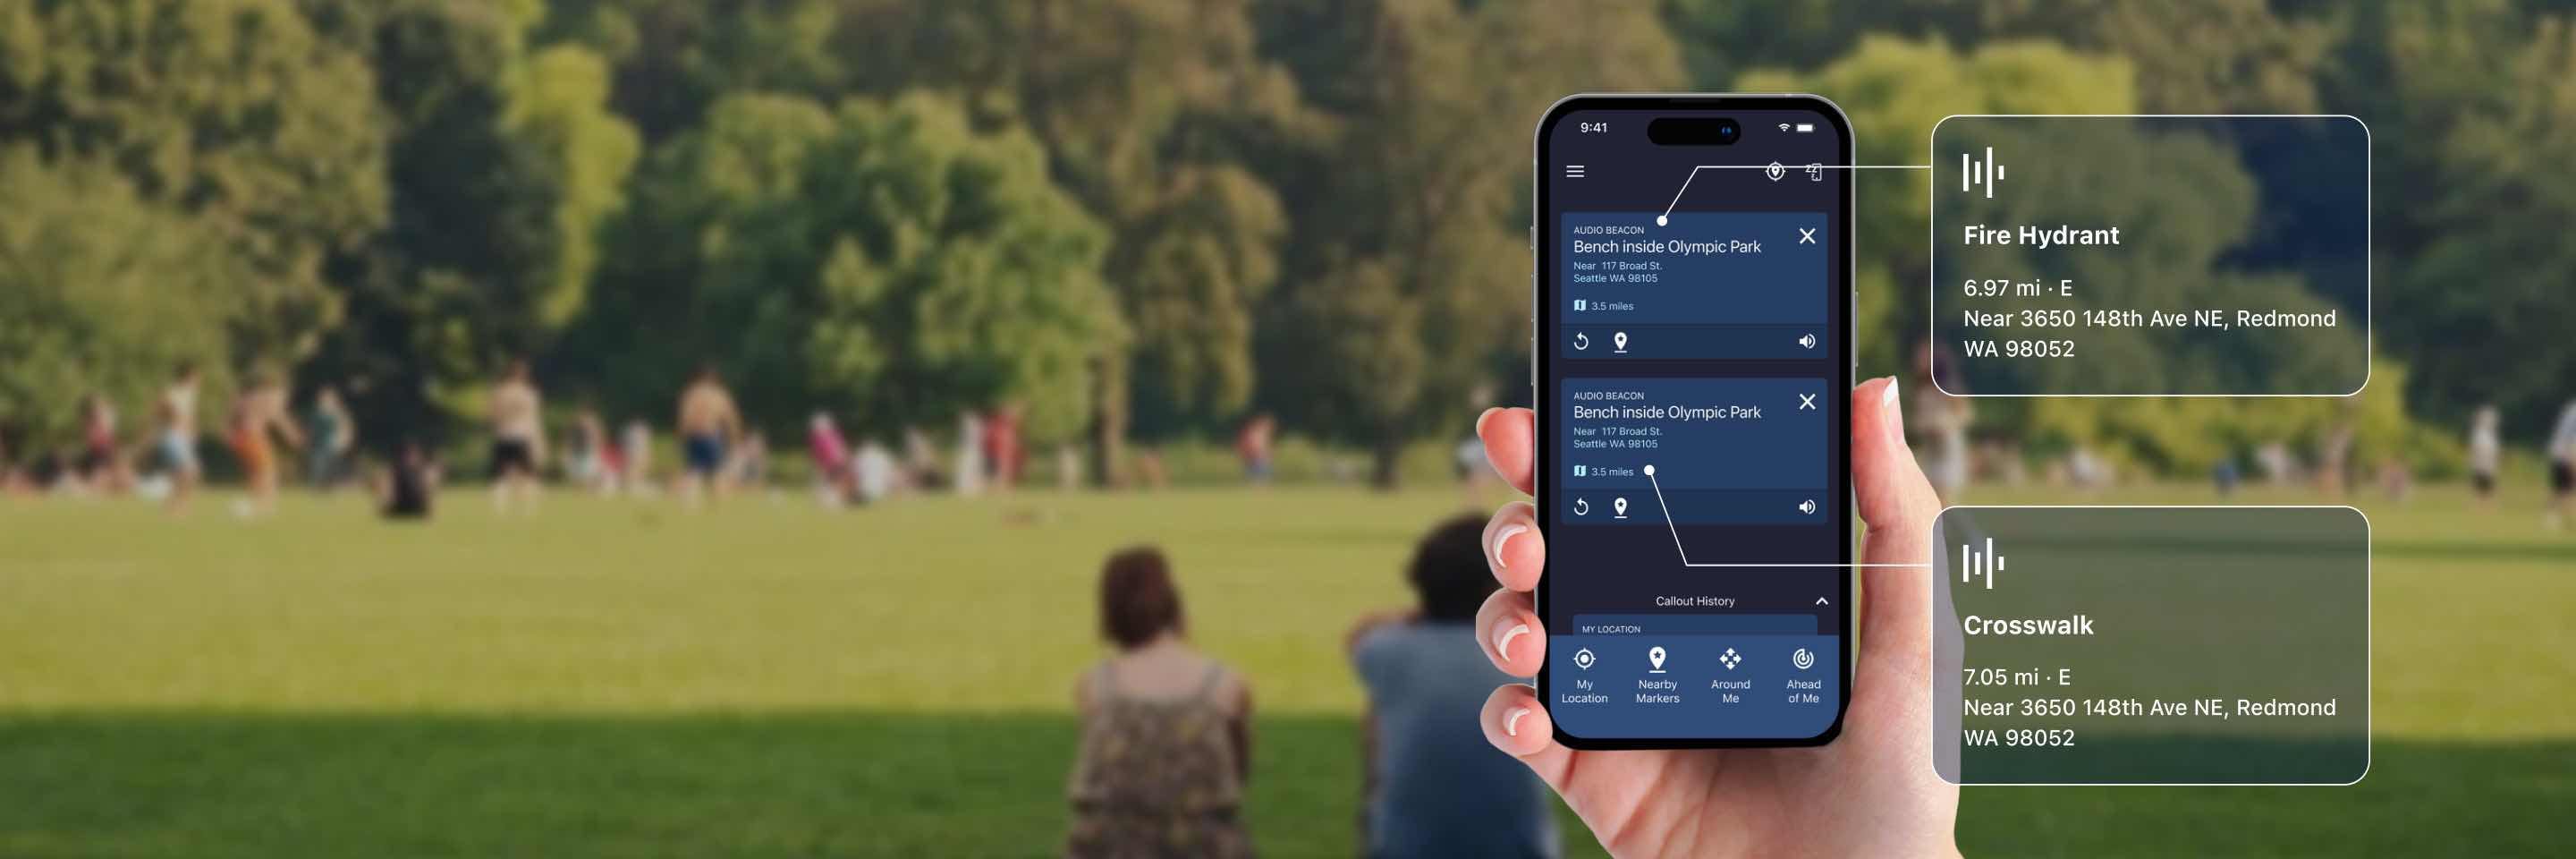 Picture of a hand holding up a phone running Soundscape Community with panels illustrating what is being called out. In the background there are people in a park.